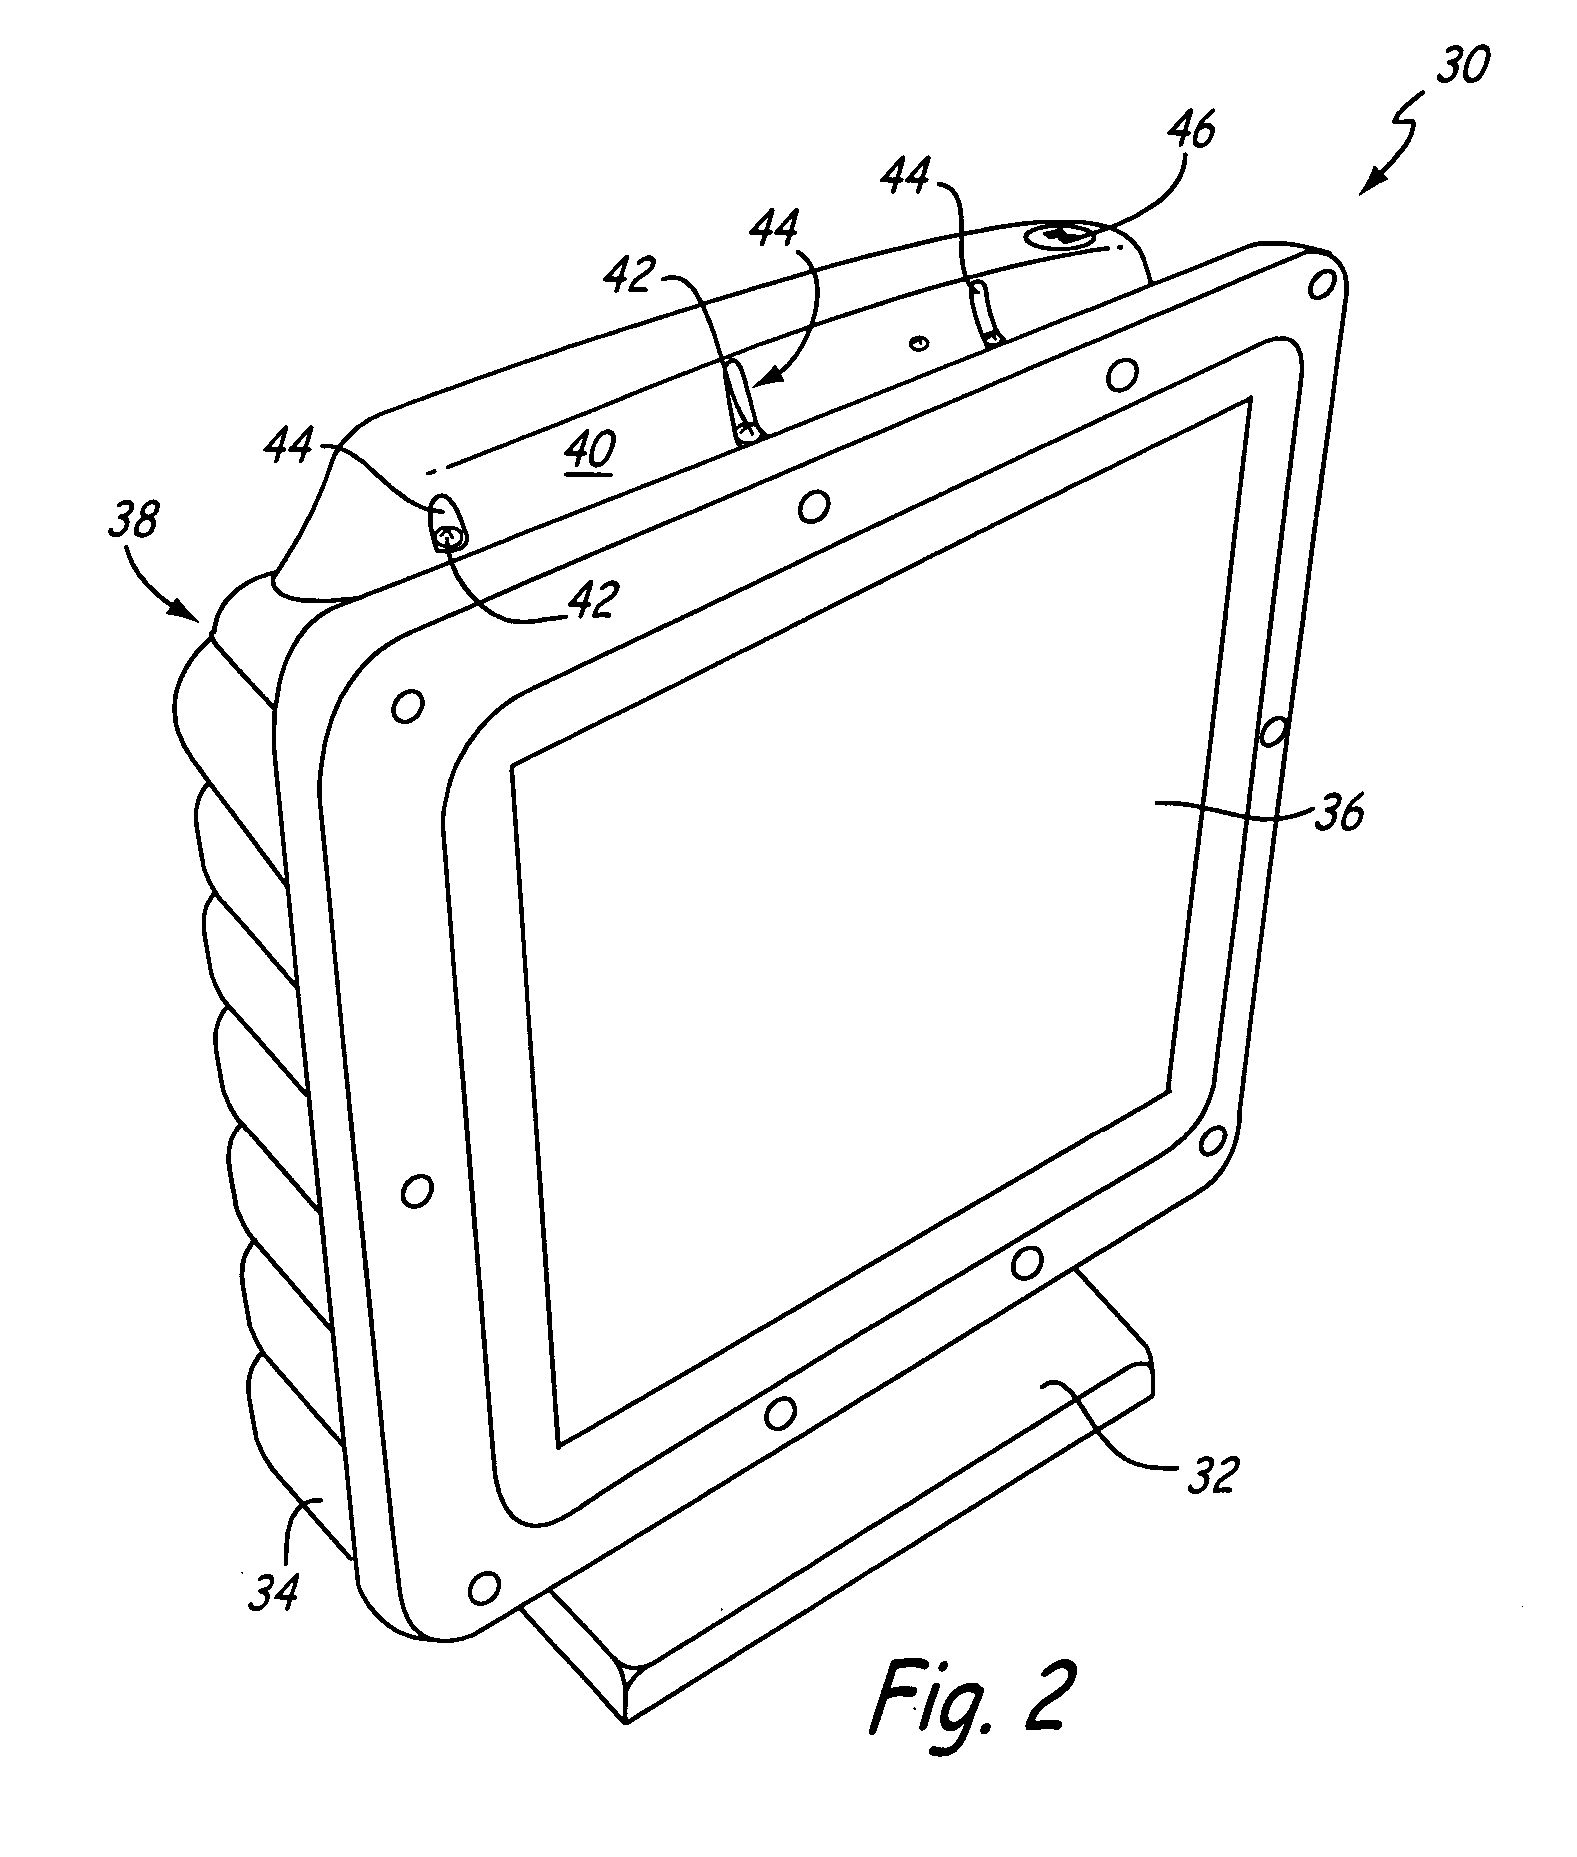 Integrated antenna/access door for a mobile computer